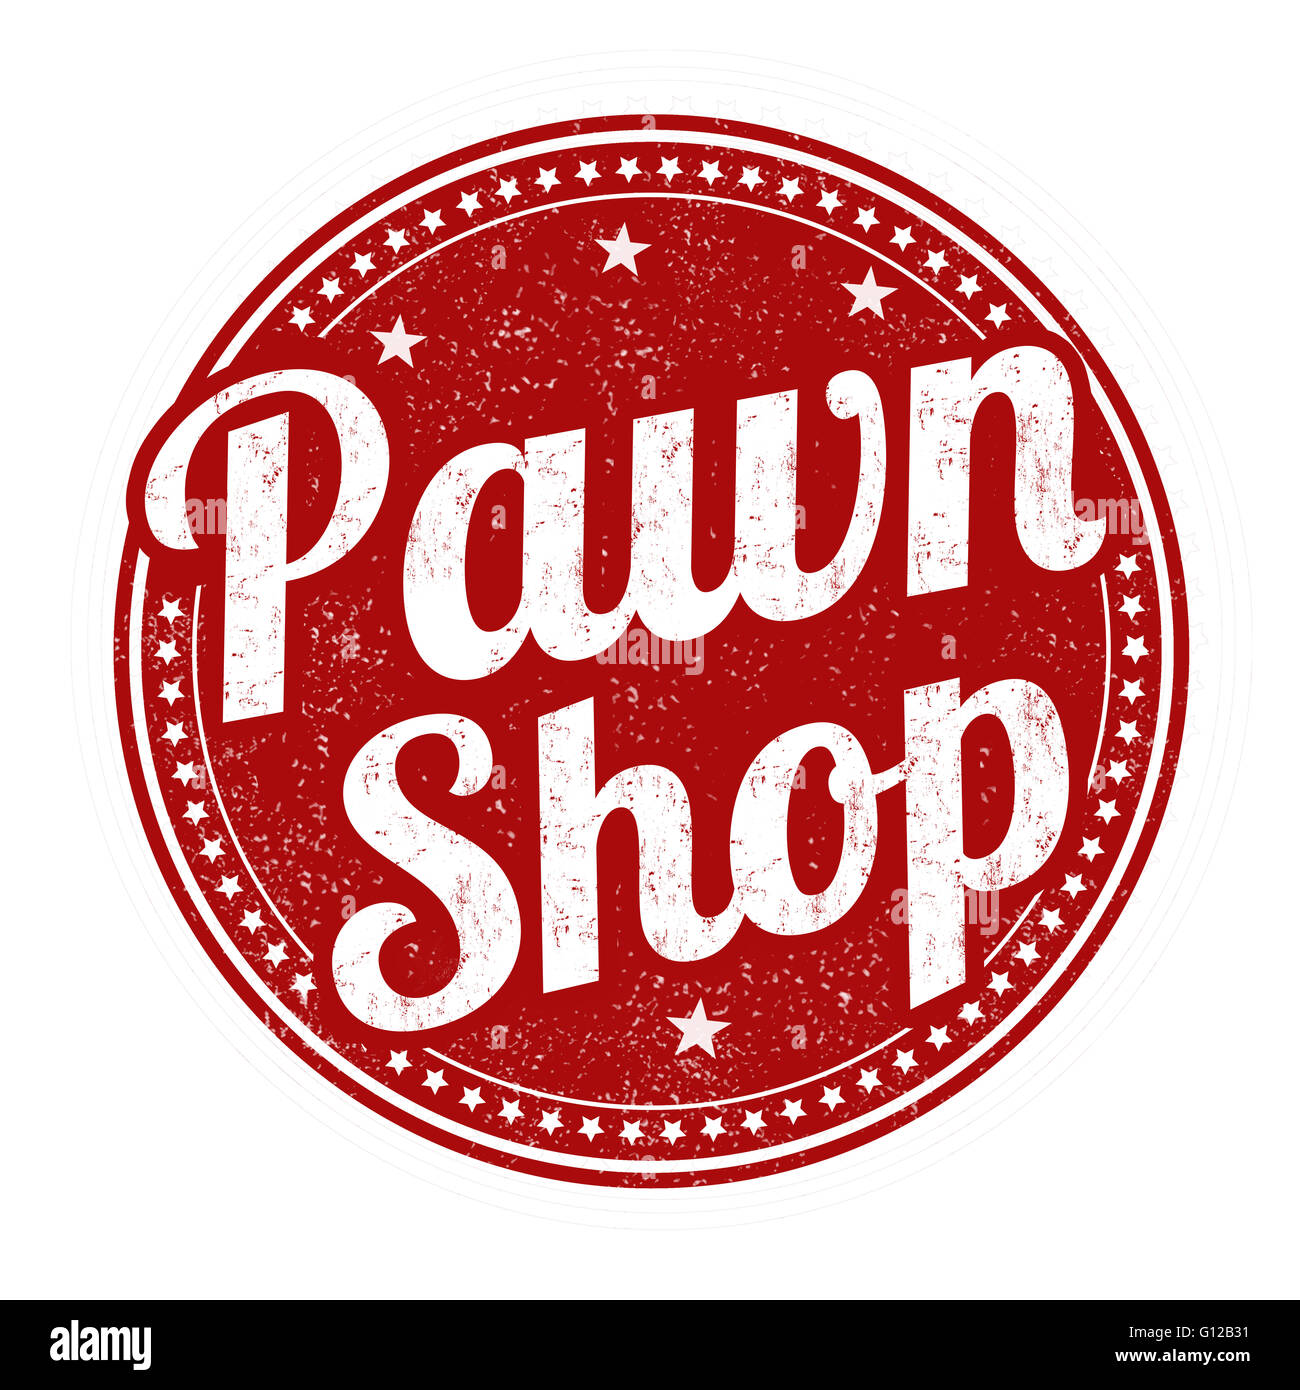 Pawn shop grunge rubber stamp on white background, vector illustration Stock Photo